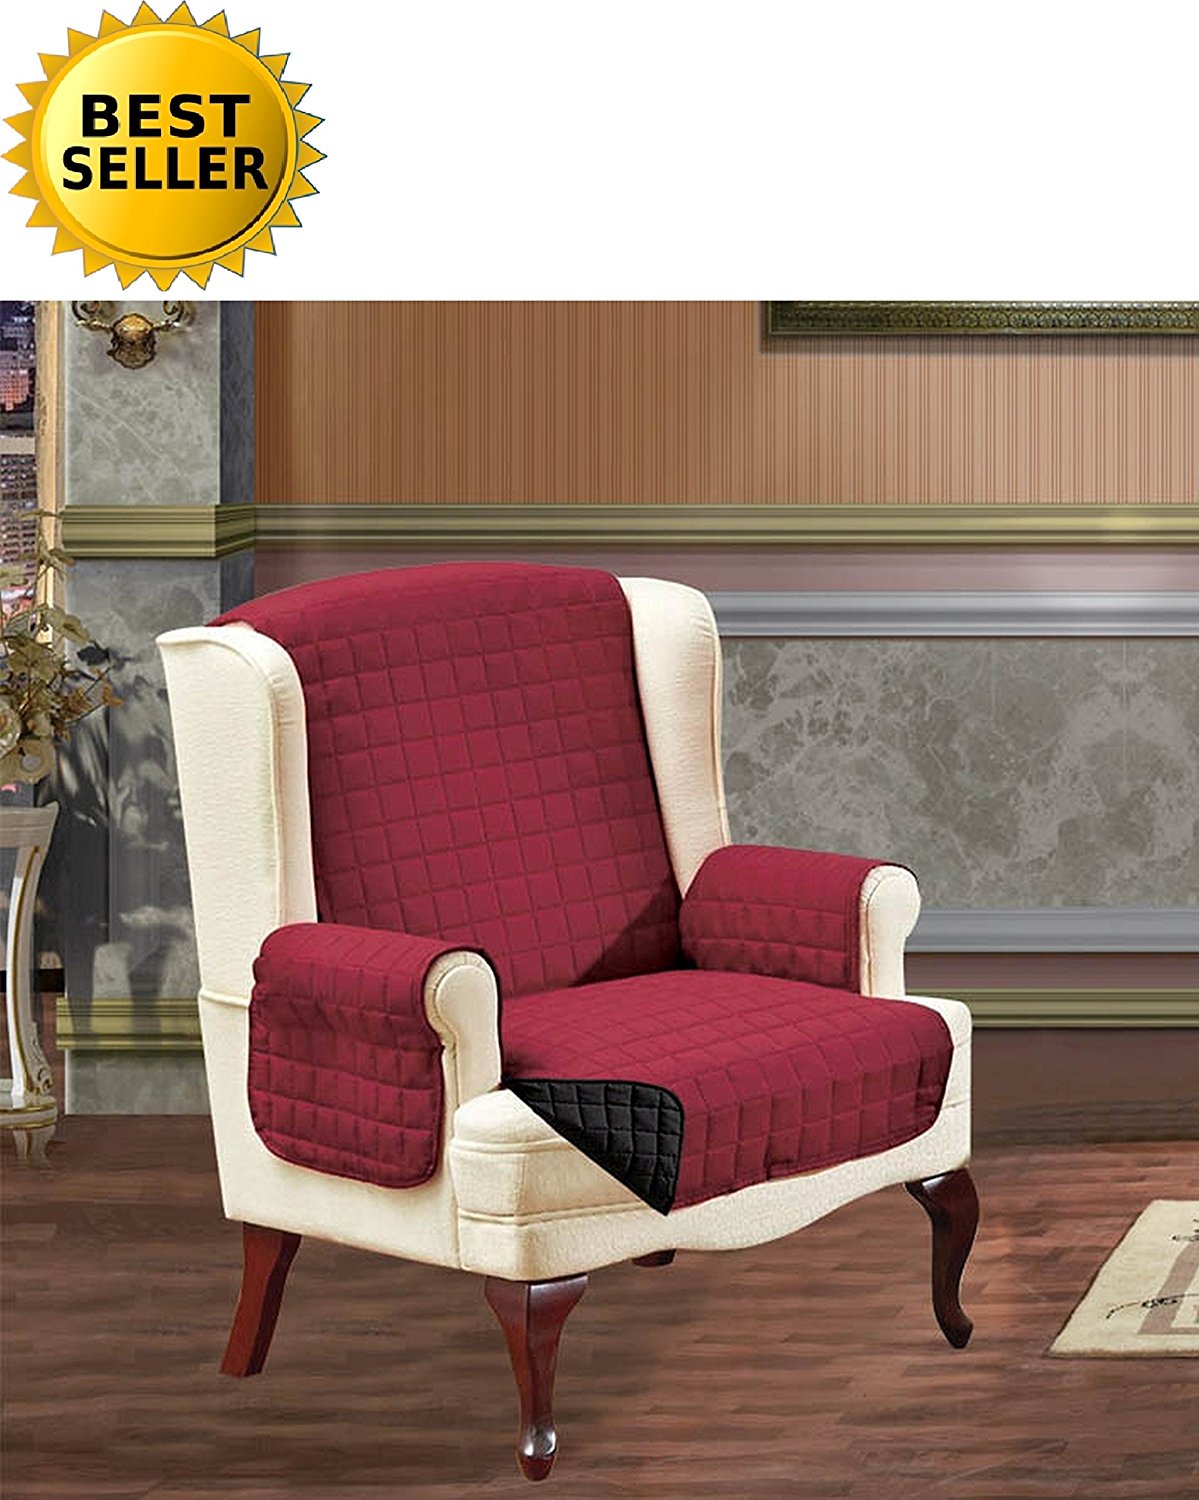 elegant comfort reversible furniture protector luxury slipcover/furniture protector great for pets & children with straps to prevent slipping off, wing chair, burgundy/black - image 1 of 1